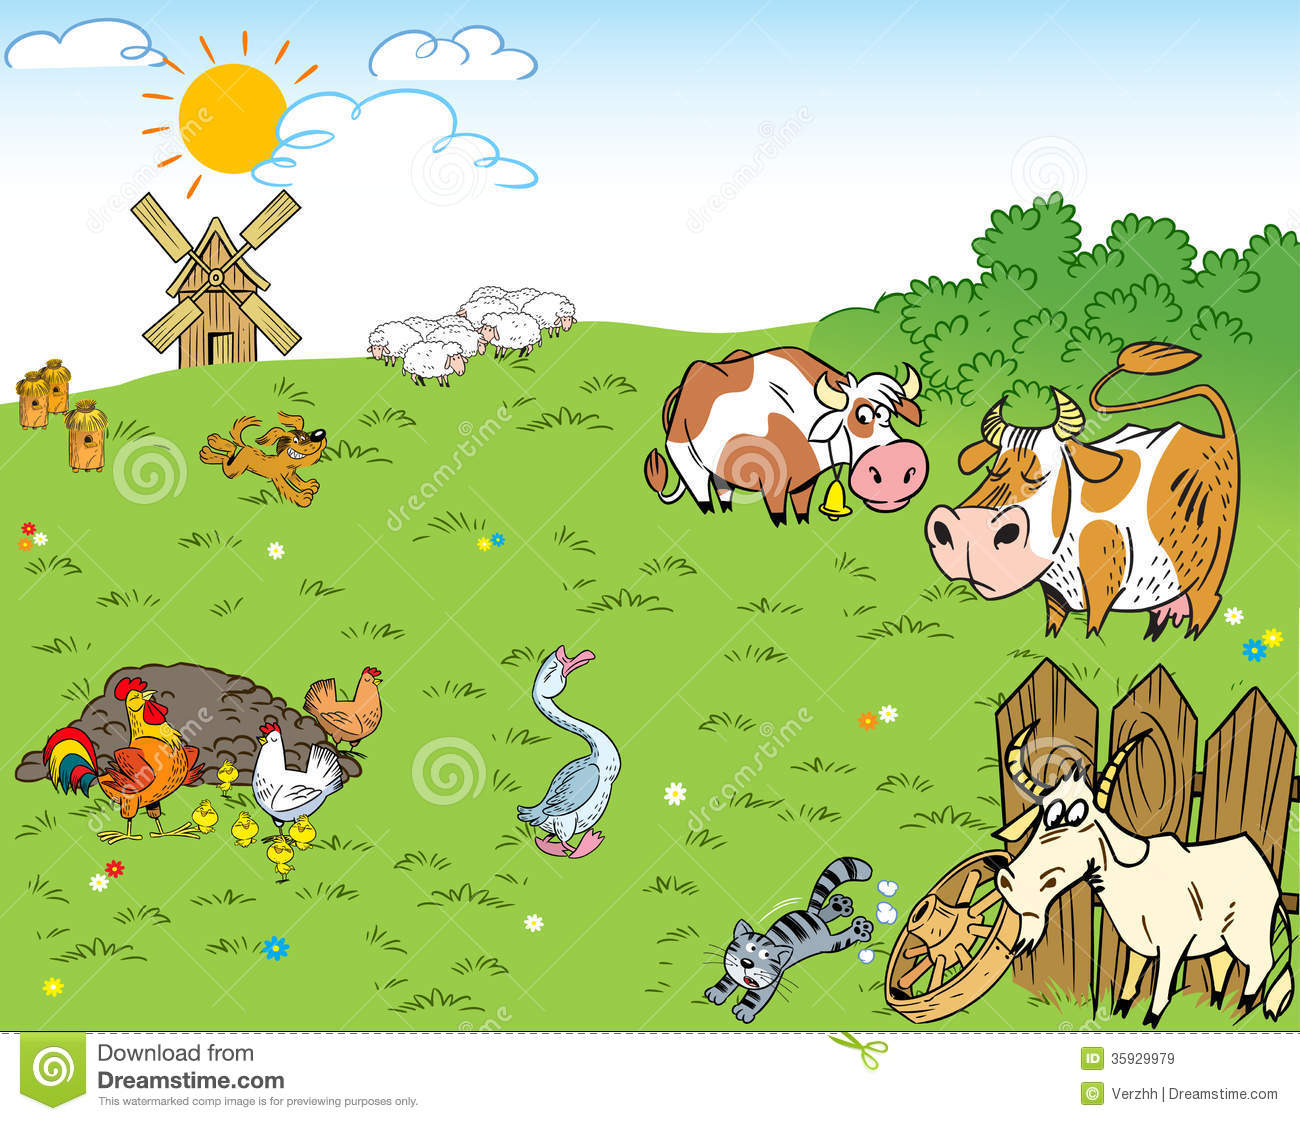 The Illustration Shows The Farmyard And Meadow On Which The Farm